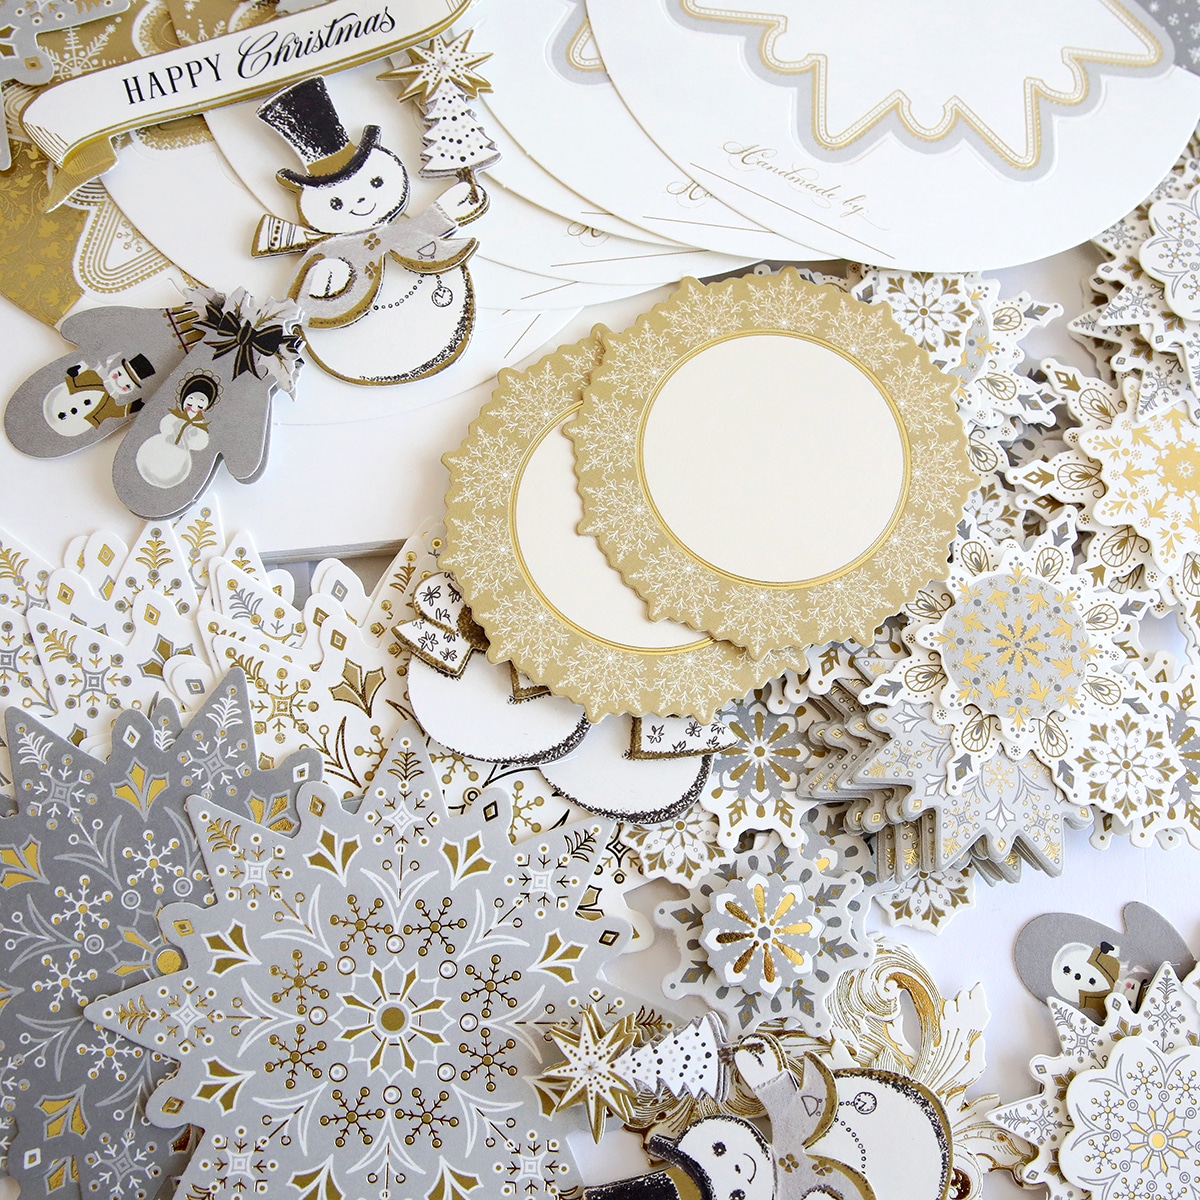 A collection of gold and silver snowflakes on a white background.